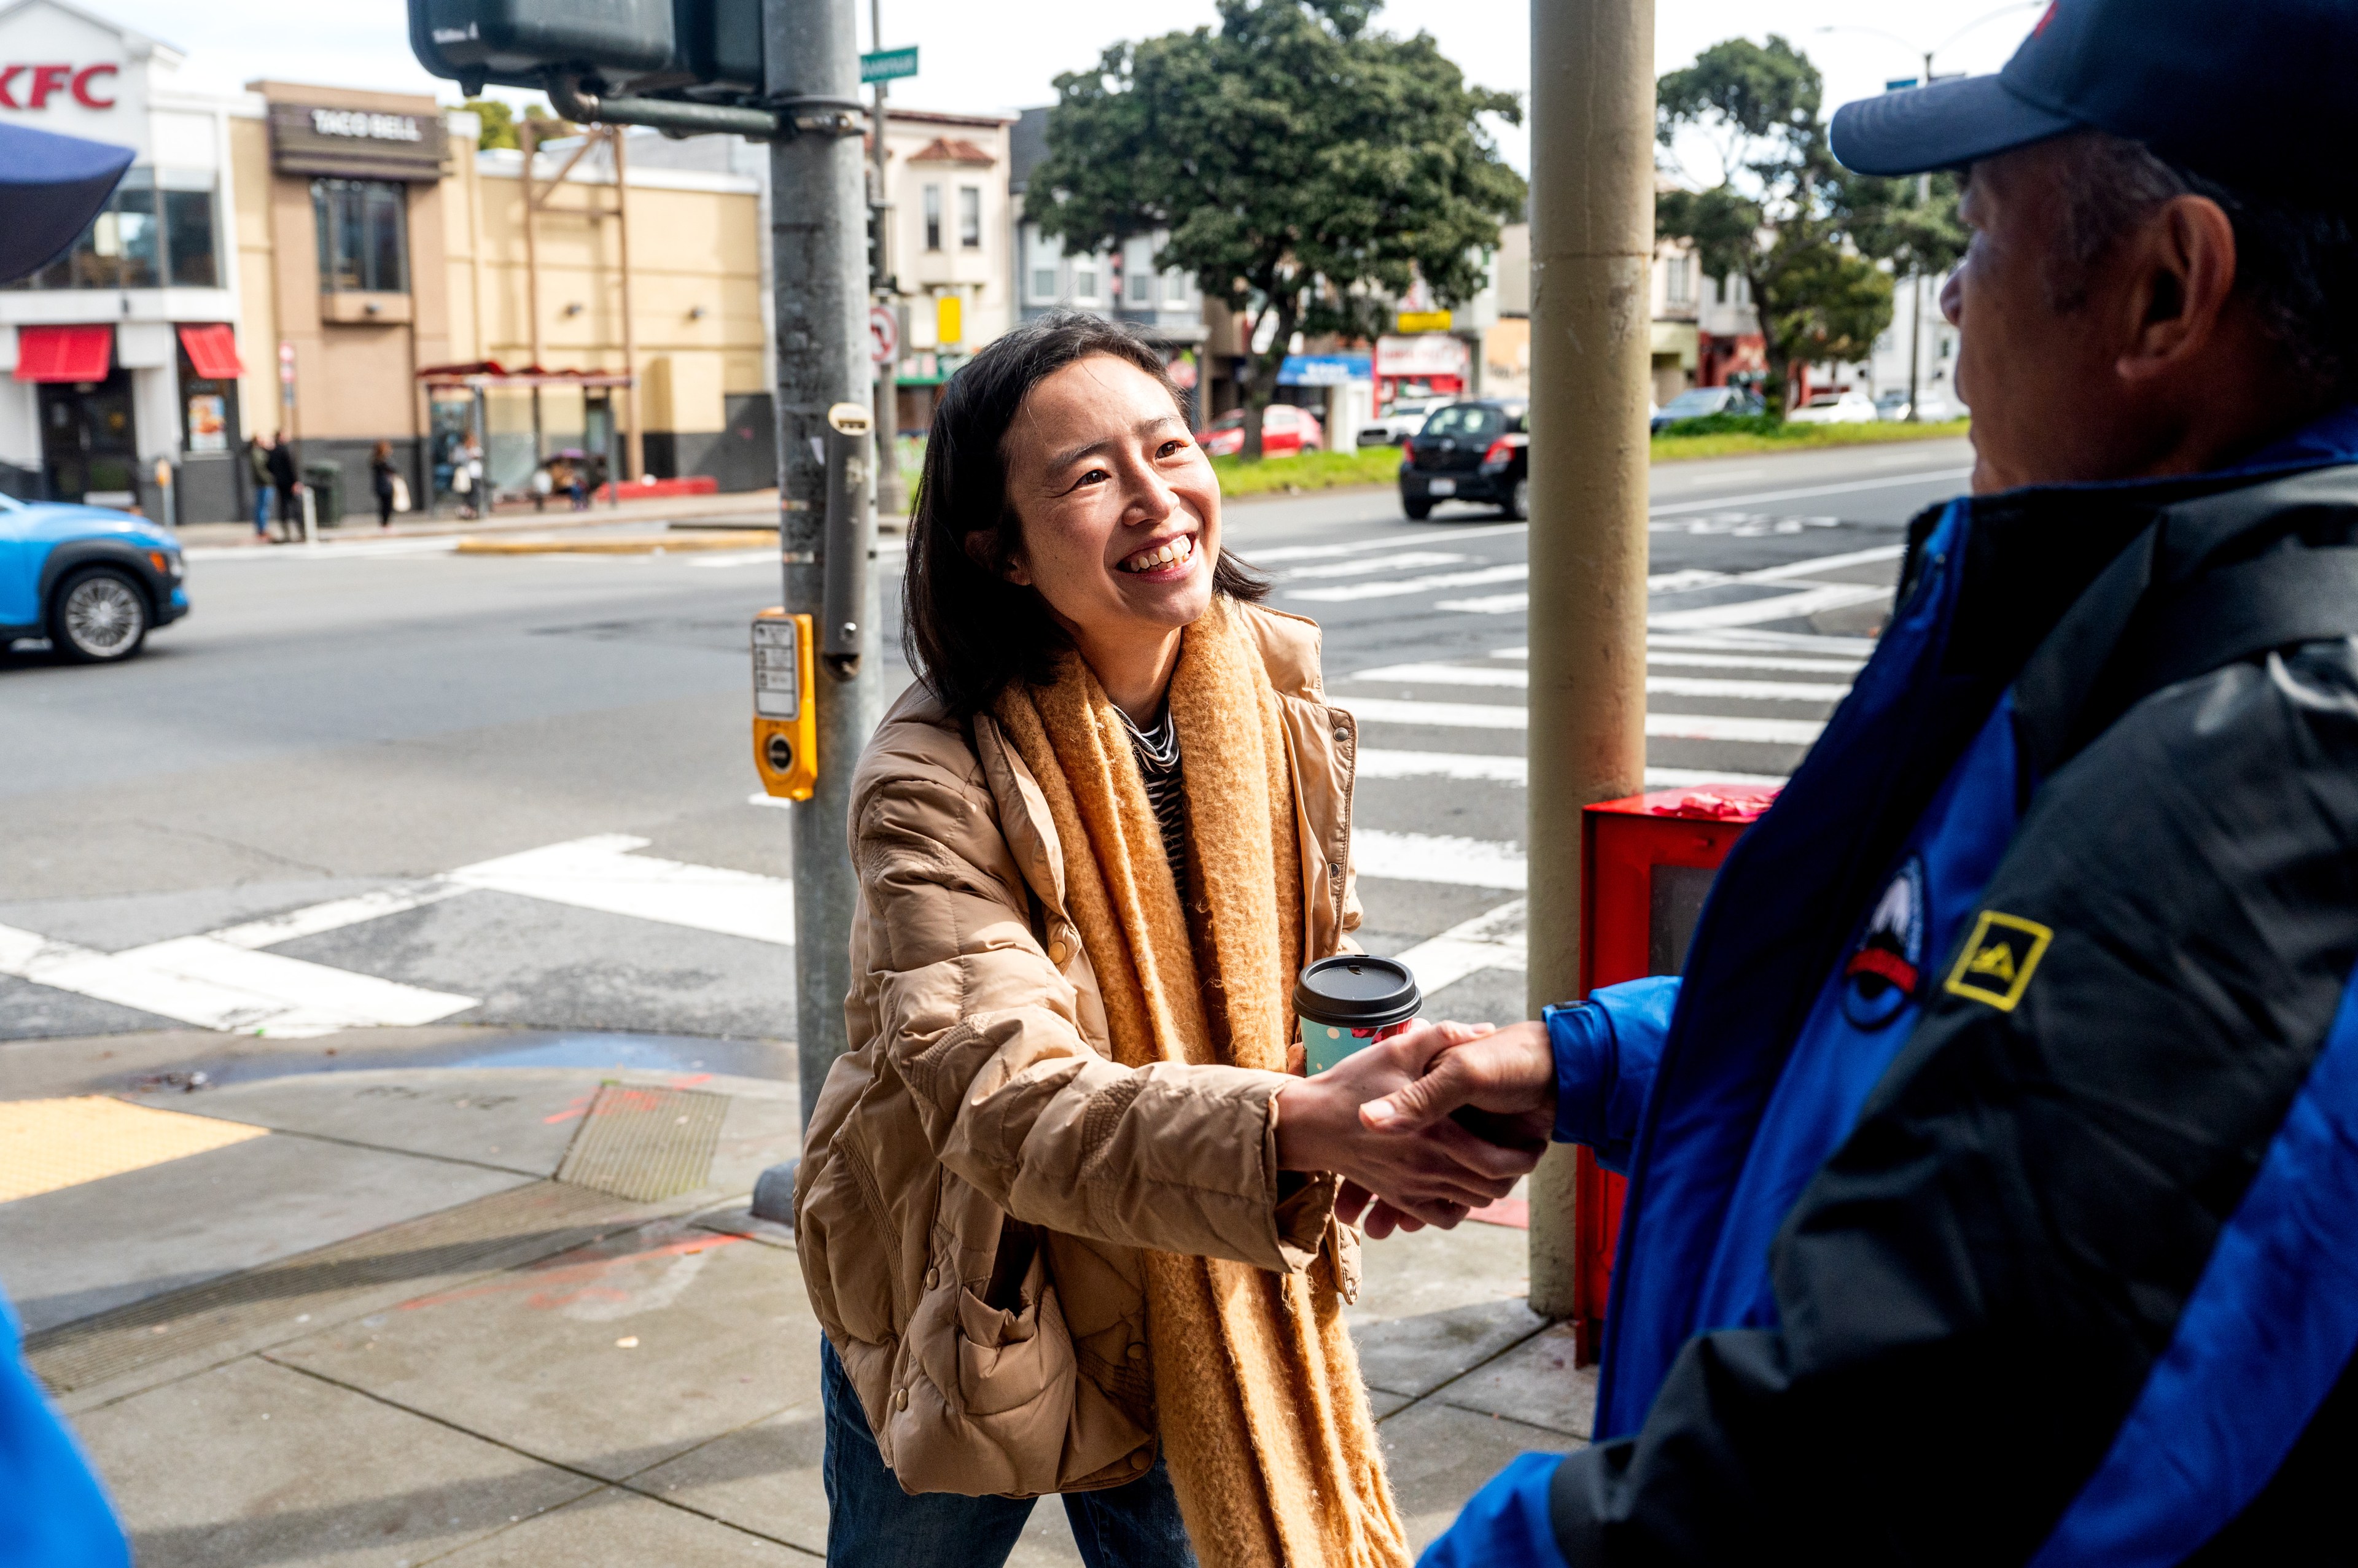 A smiling woman shaking hands with a man on a city street corner, both holding coffee cups.